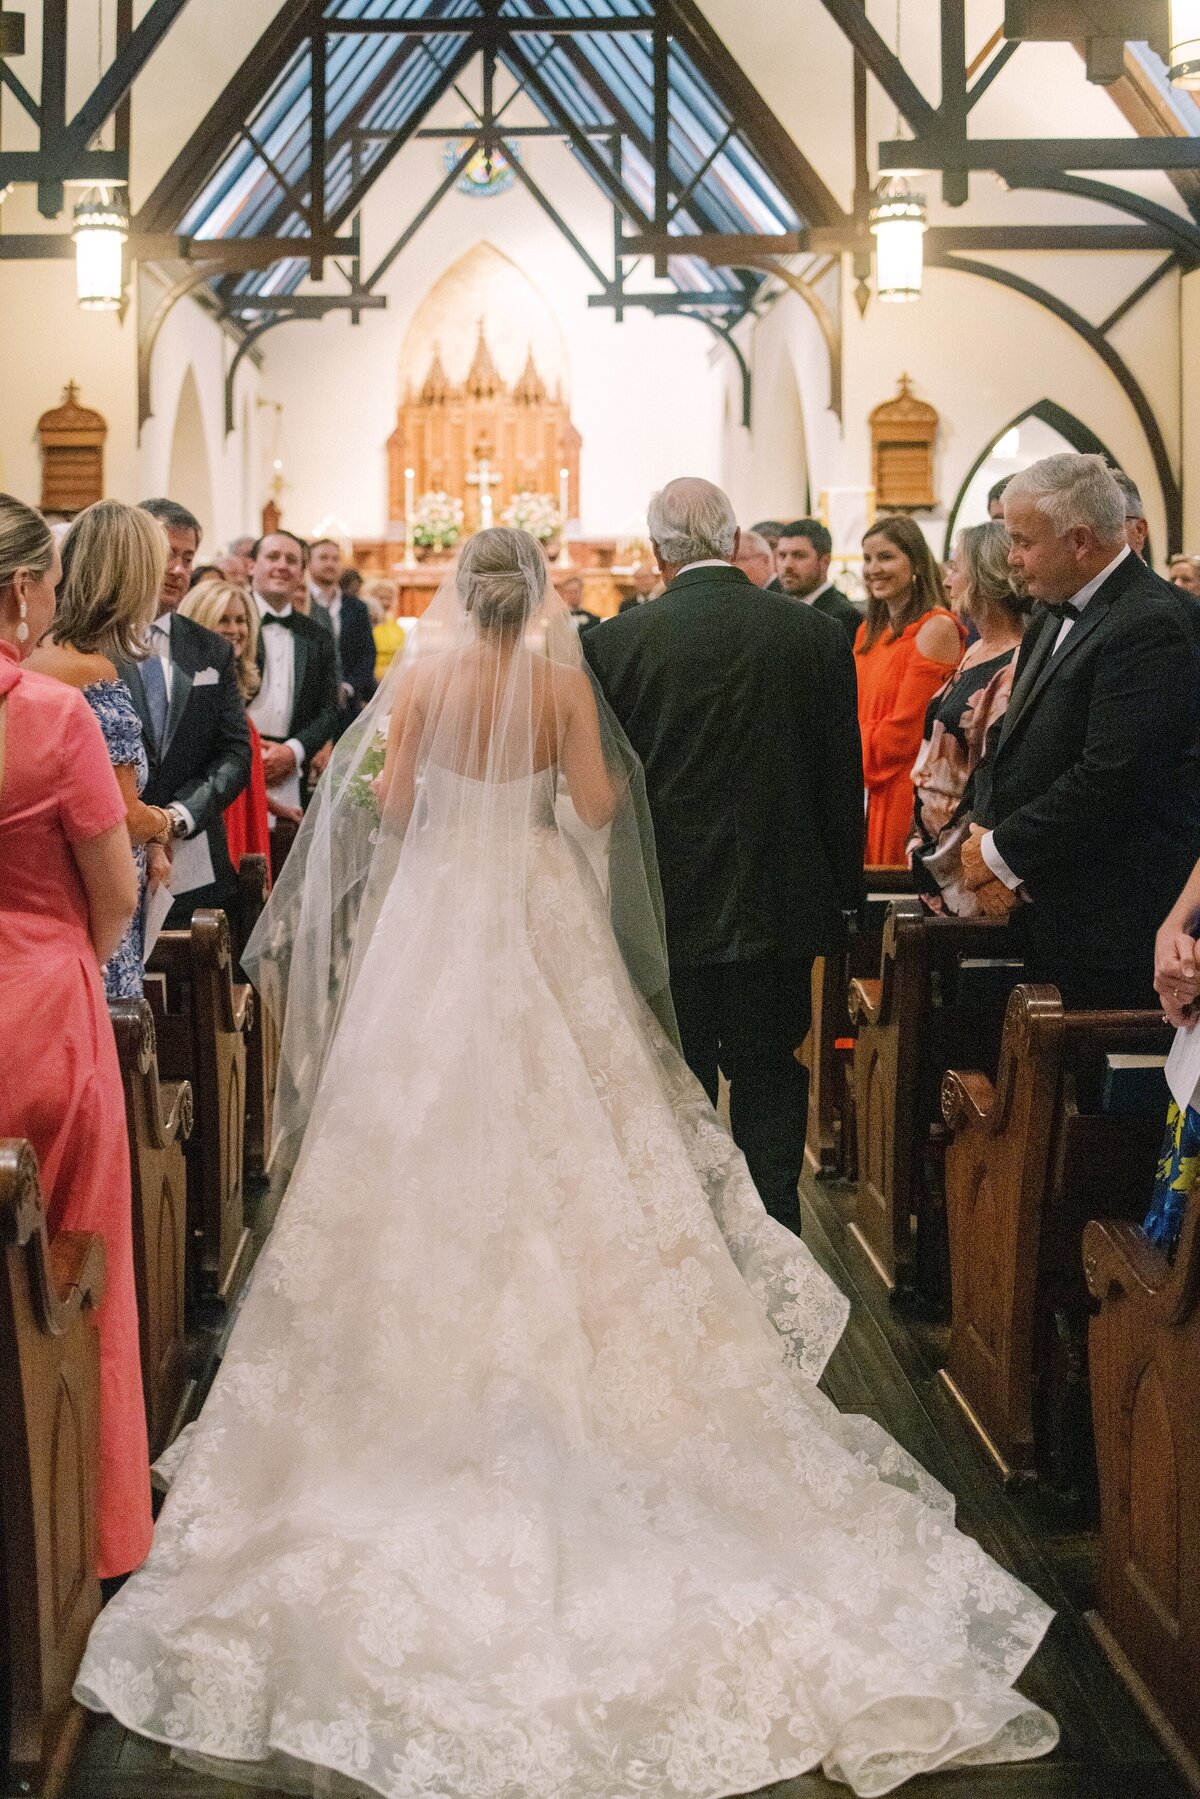 A wedding ceremony at St. John's Episcopal Church in Tallahassee, FL - 2